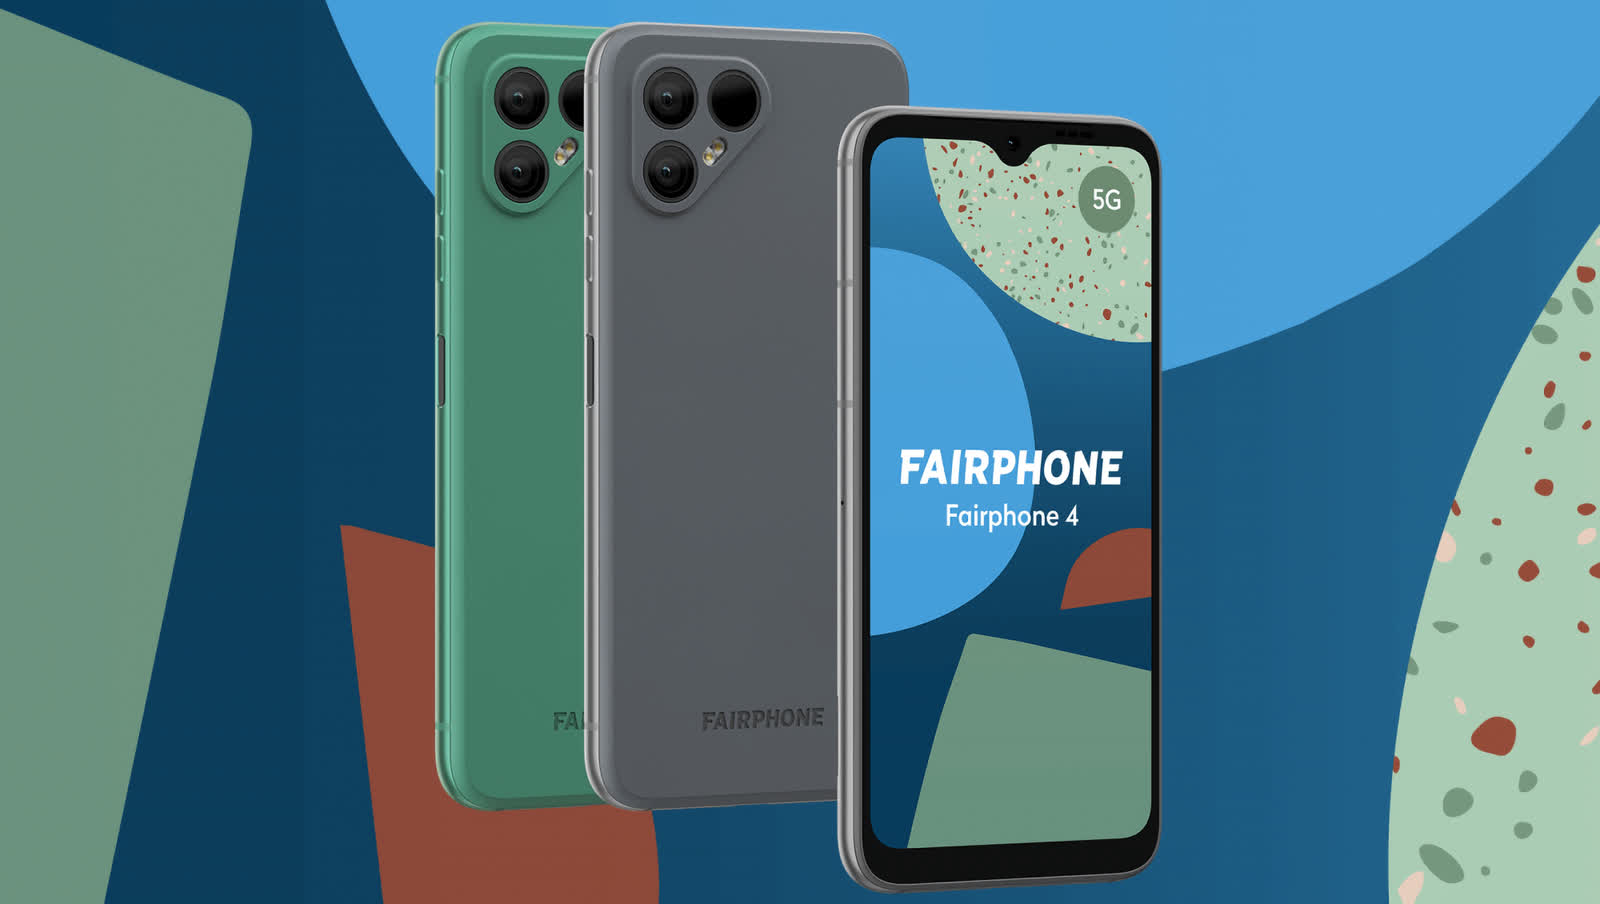 The new Fairphone 4 is the company's most sustainable phone yet